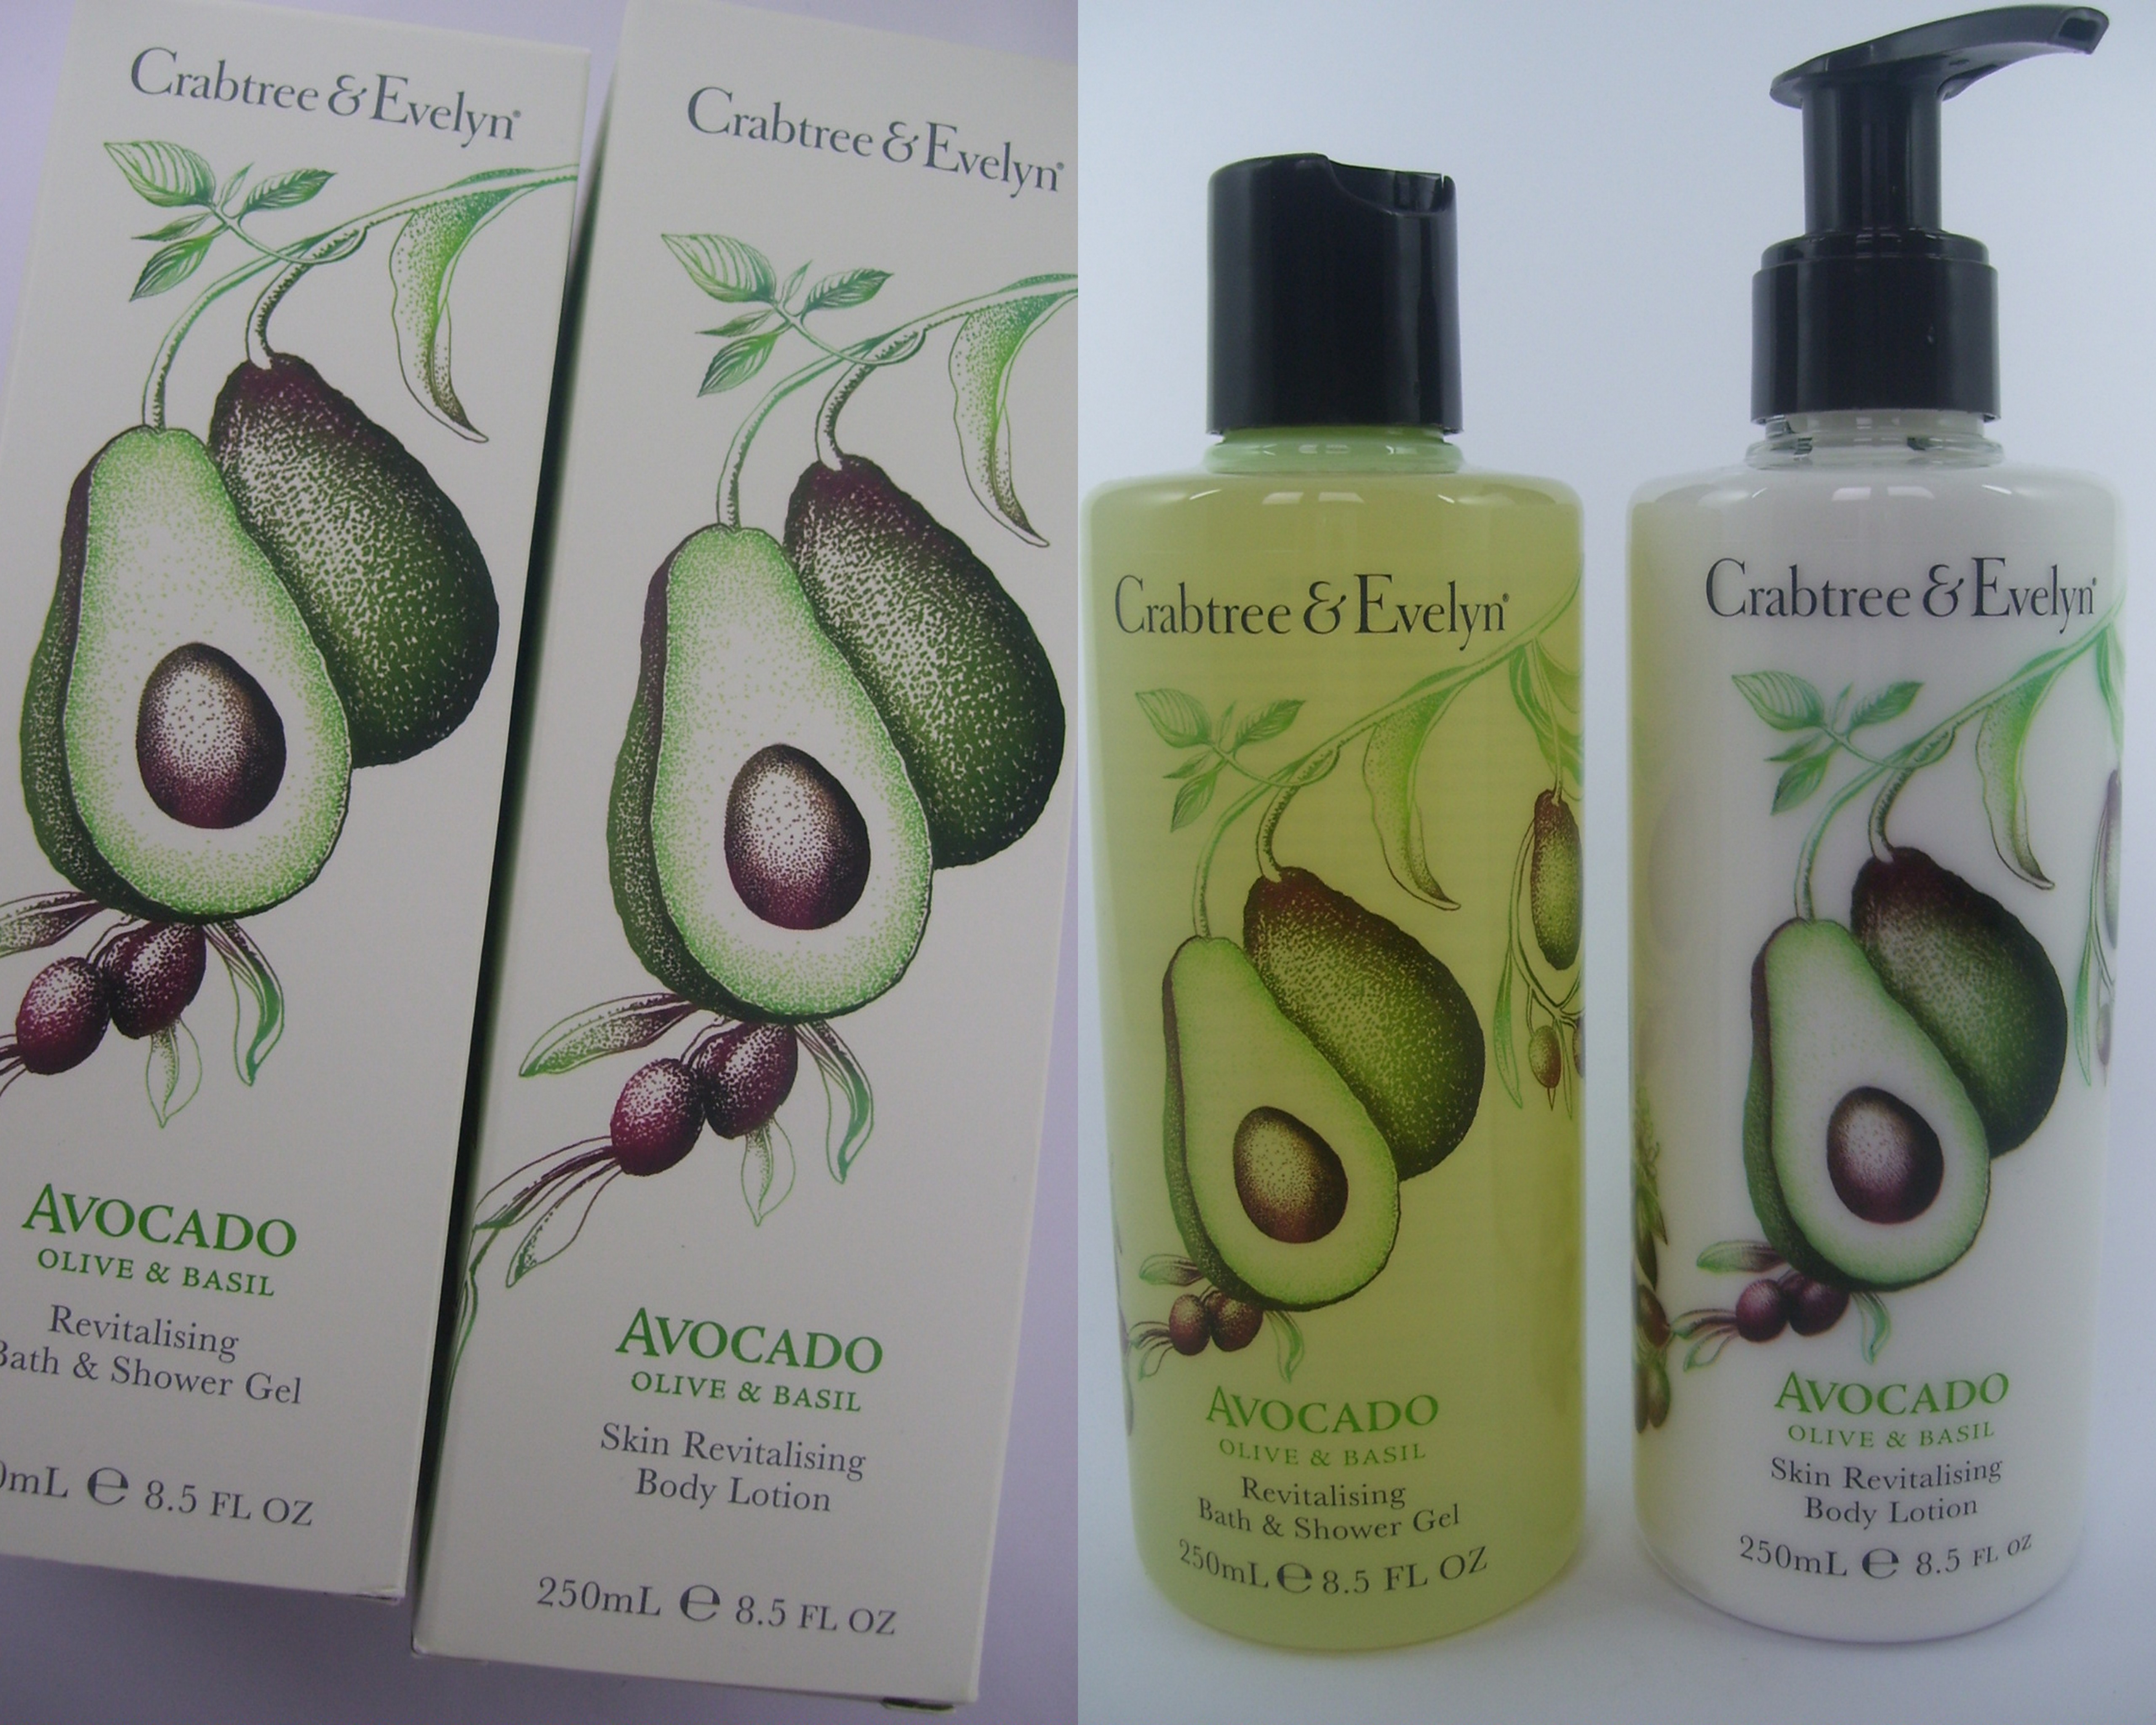 CLOSED* Review & Giveaway! Crabtree & Evelyn Avocado Olive & Basil  Collection - My Highest Self